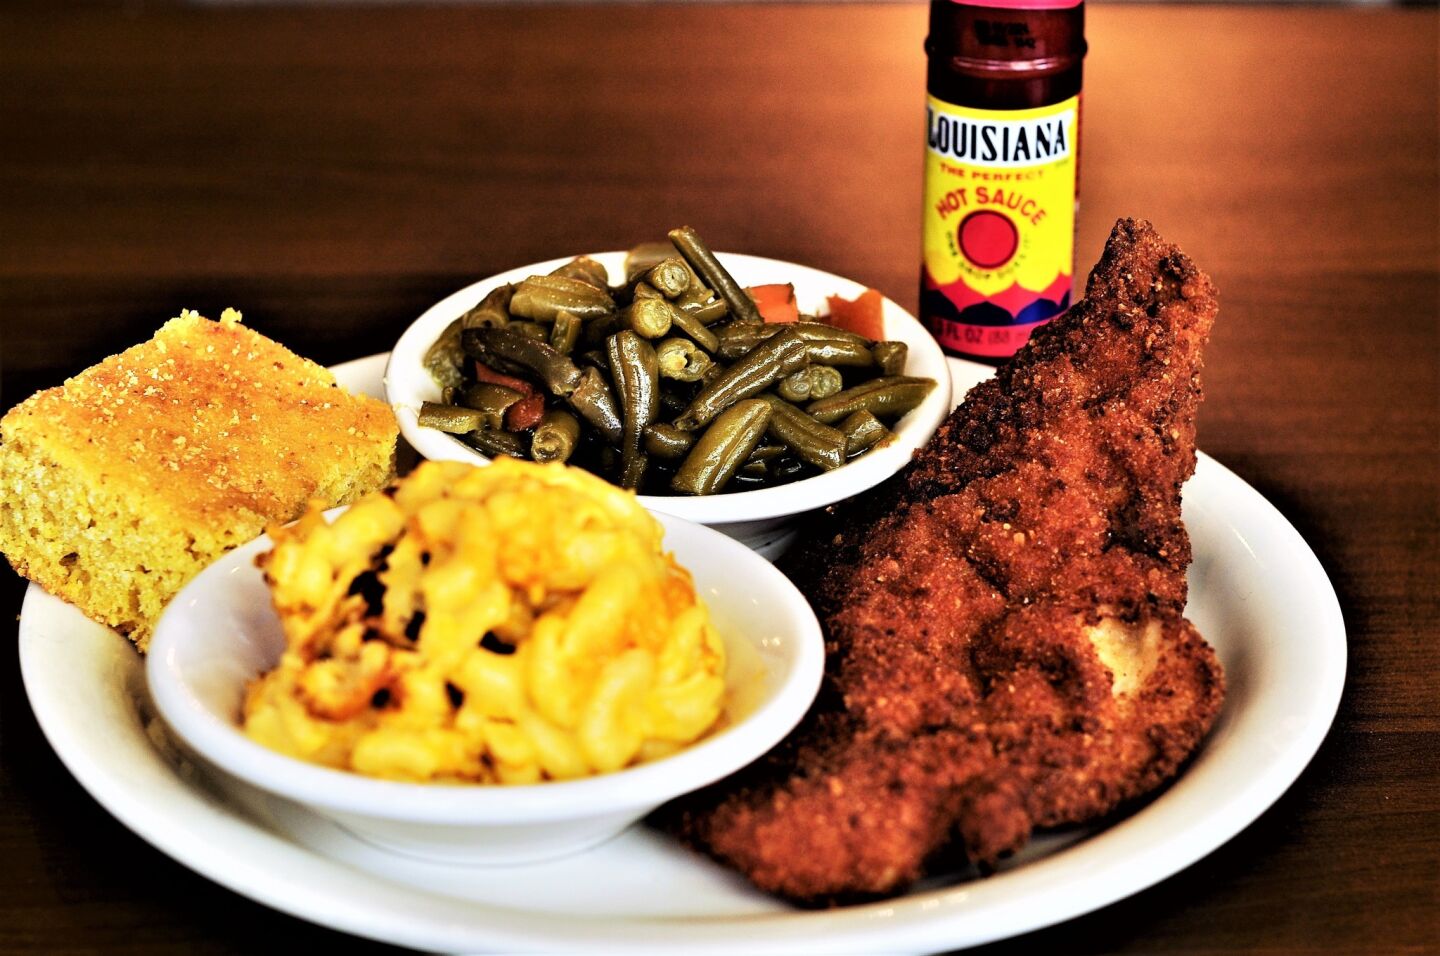 Josephine's Cooking recently got a facelift from Food Network's show "Restaurant Impossible," but thankfully its menu hasn't deviated from its soul food favorites. Get the fried catfish fillet ($12.95), coated in cornmeal and fried until it's a deep brown while still flaky and moisture-laden inside. For your sides, don't miss the green beans, stewed with bacon until soft, or the mac and cheese. But make sure you save room for dessert because the peach cobbler ($4) is every bit as comforting as it sounds with ooey gooey filling and a chewy biscuit top. 436 E. 79th St., 773-487-2900 — Grace Wong